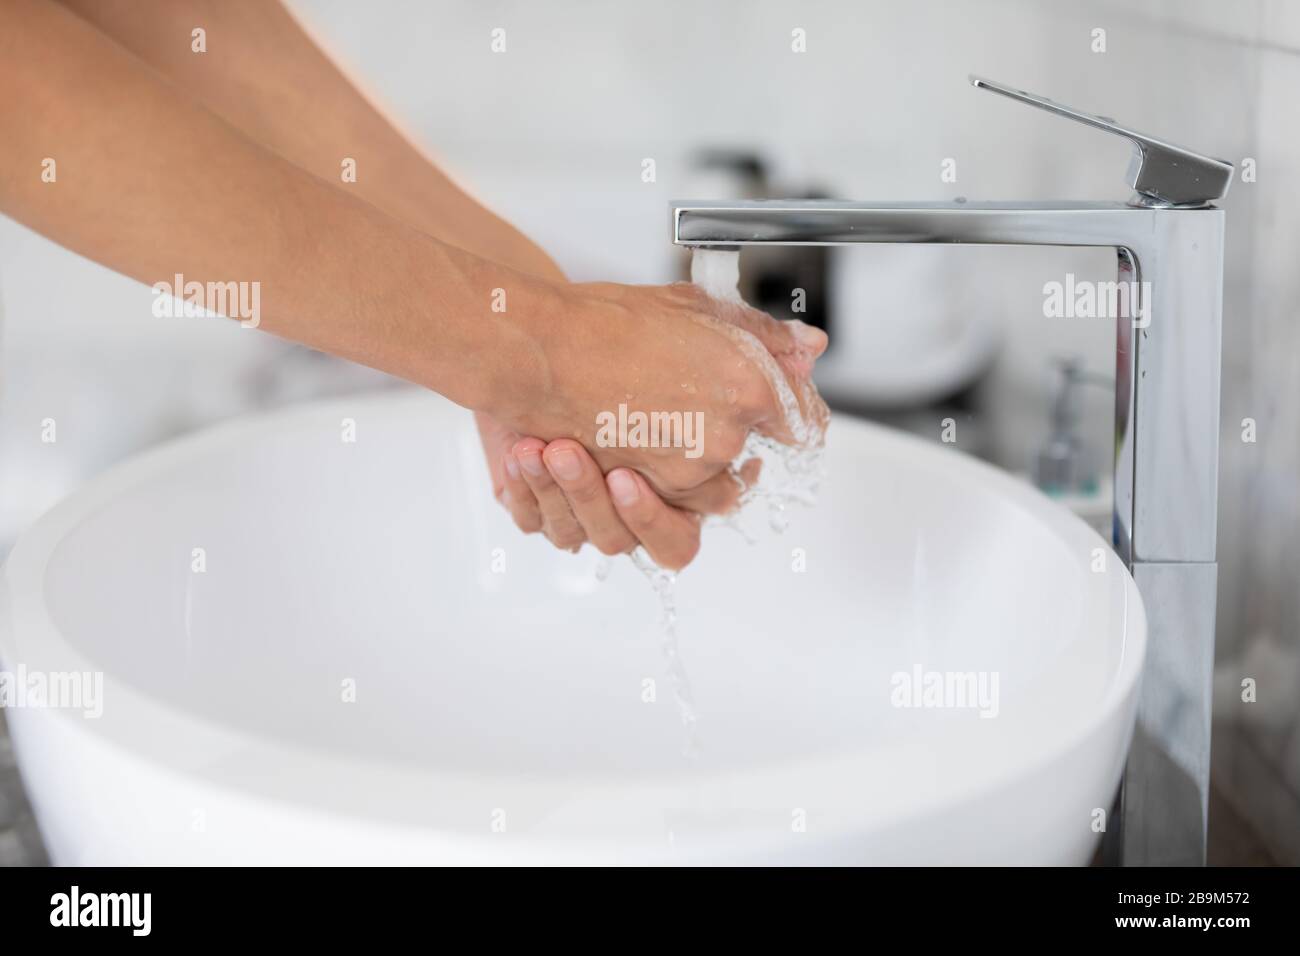 Water pour from tap while woman wash hands closeup view Stock Photo